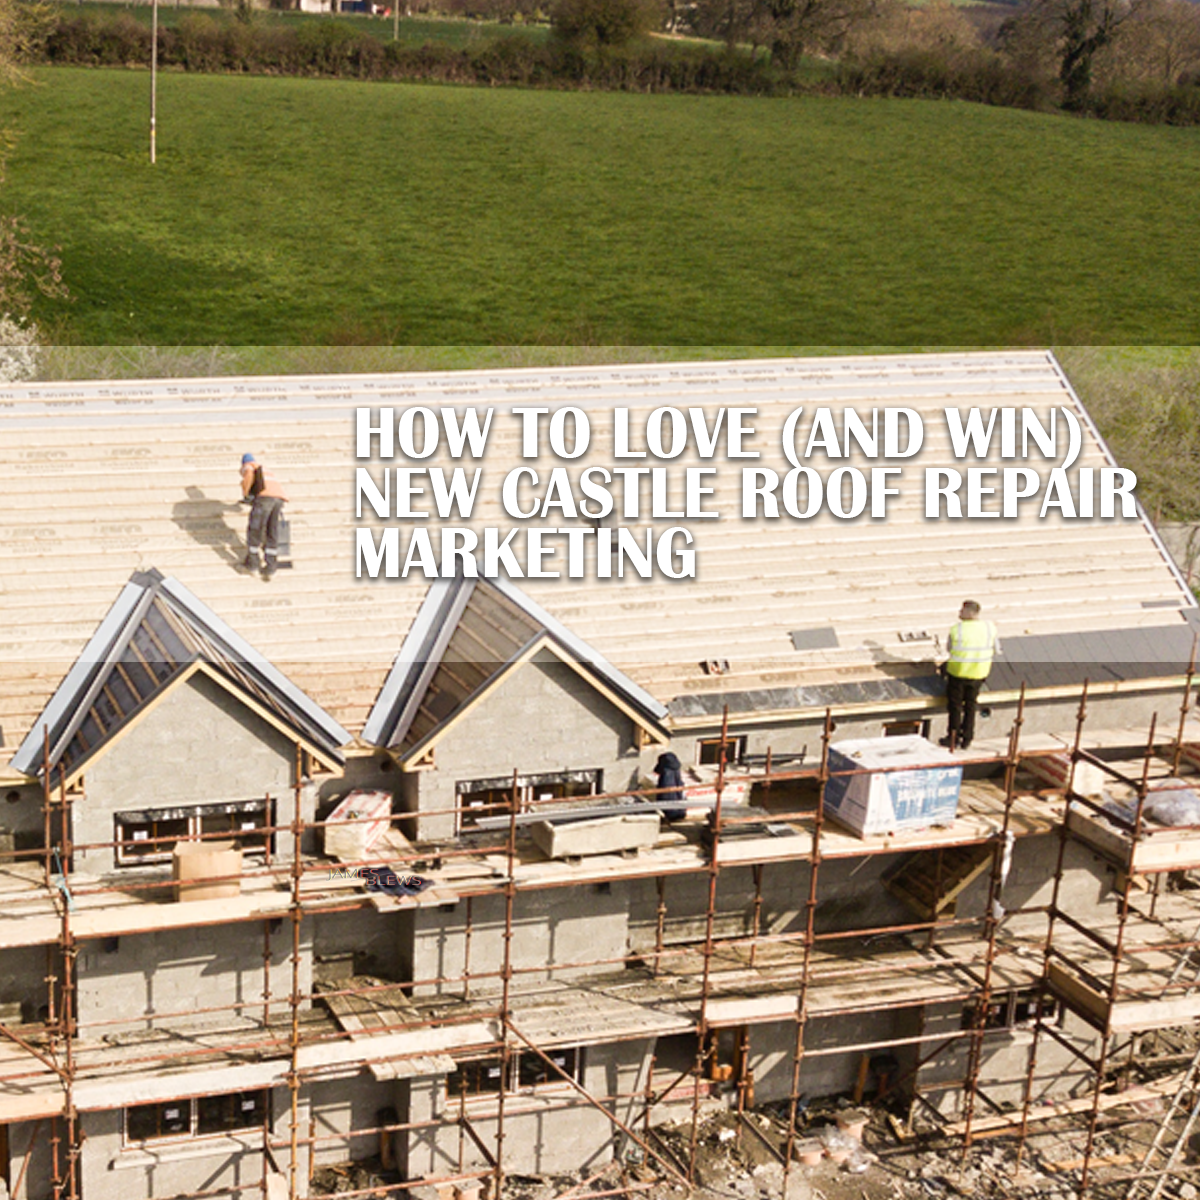 How to love (and win) New Castle roof repair marketing